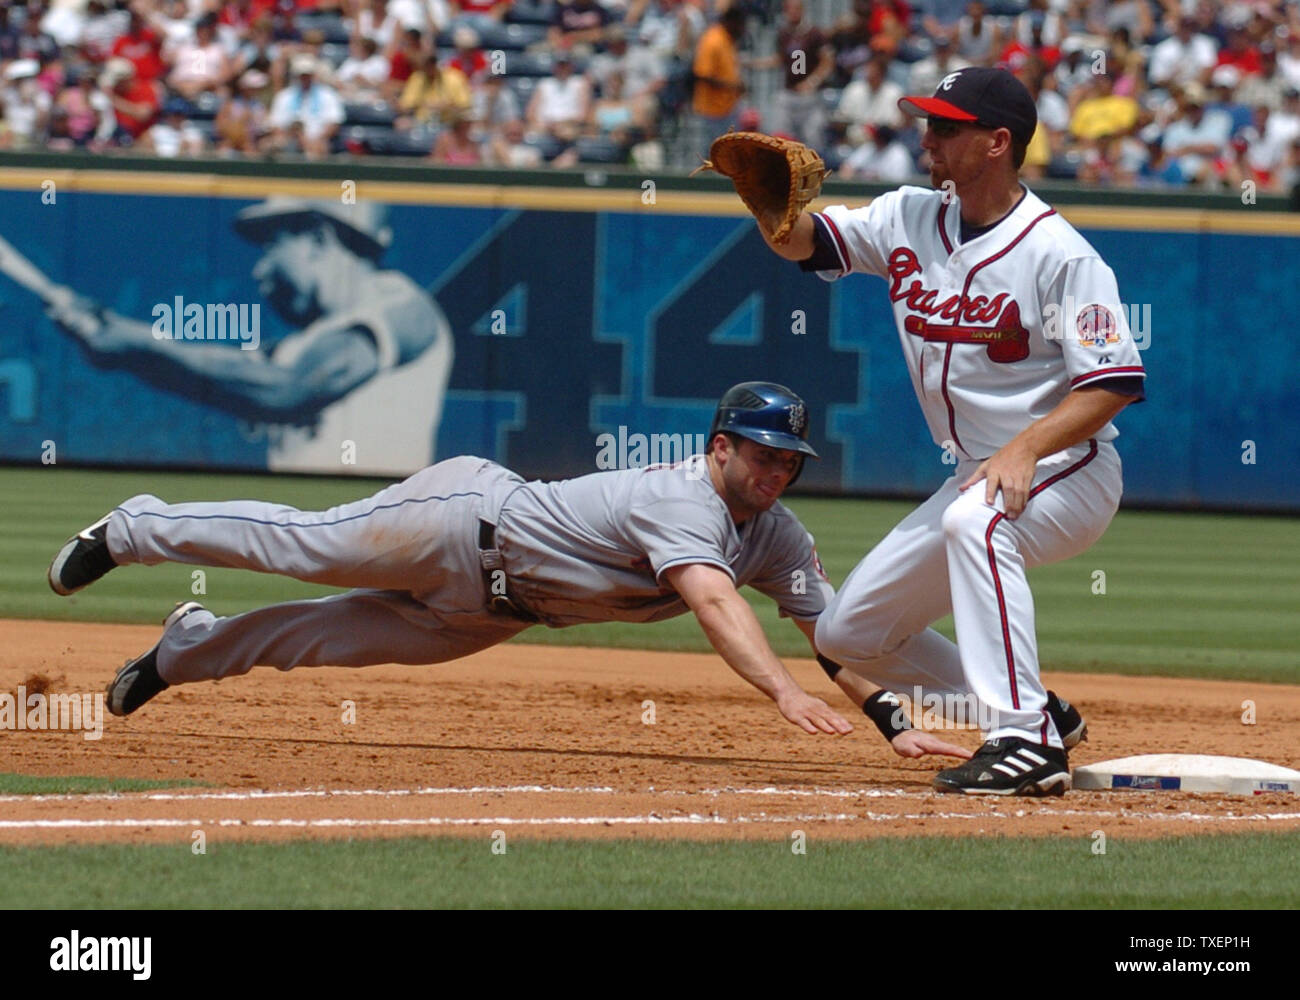 New York Mets Paul Wright easily gets back to first covered by Atlanta Braves Adam LaRoche on a pick-off attempt in the sixth inning July 29, 2006, in Atlanta's Turner Field. The Mets defeated the Braves 11-3. (UPI Photo/John Dickerson) Stock Photo